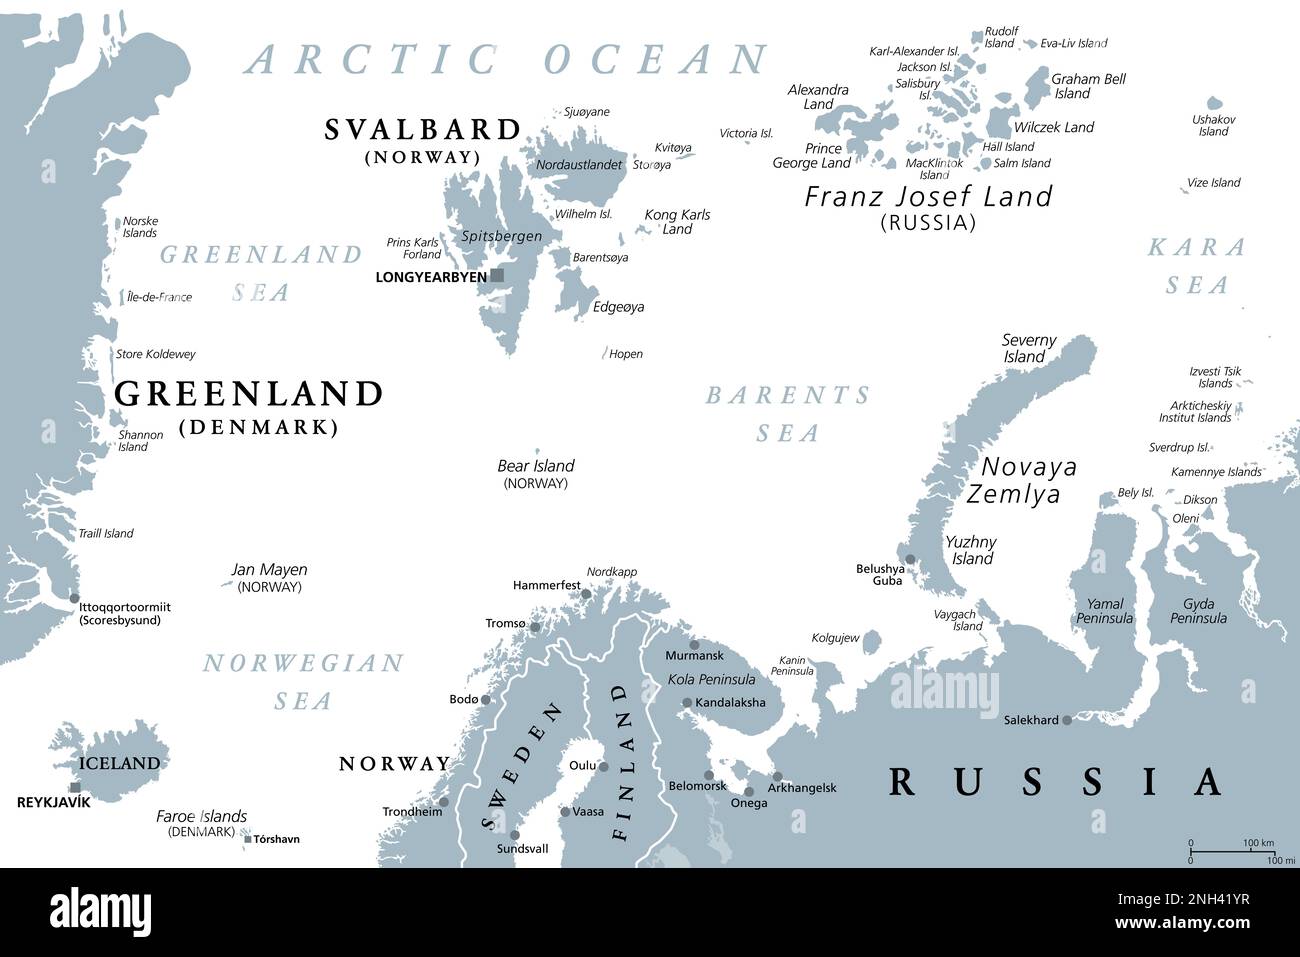 Arctic Ocean region, north of mainland Europe, gray political map. From eastern Greenland to Svalbard, to Franz Josef Land. Stock Photo